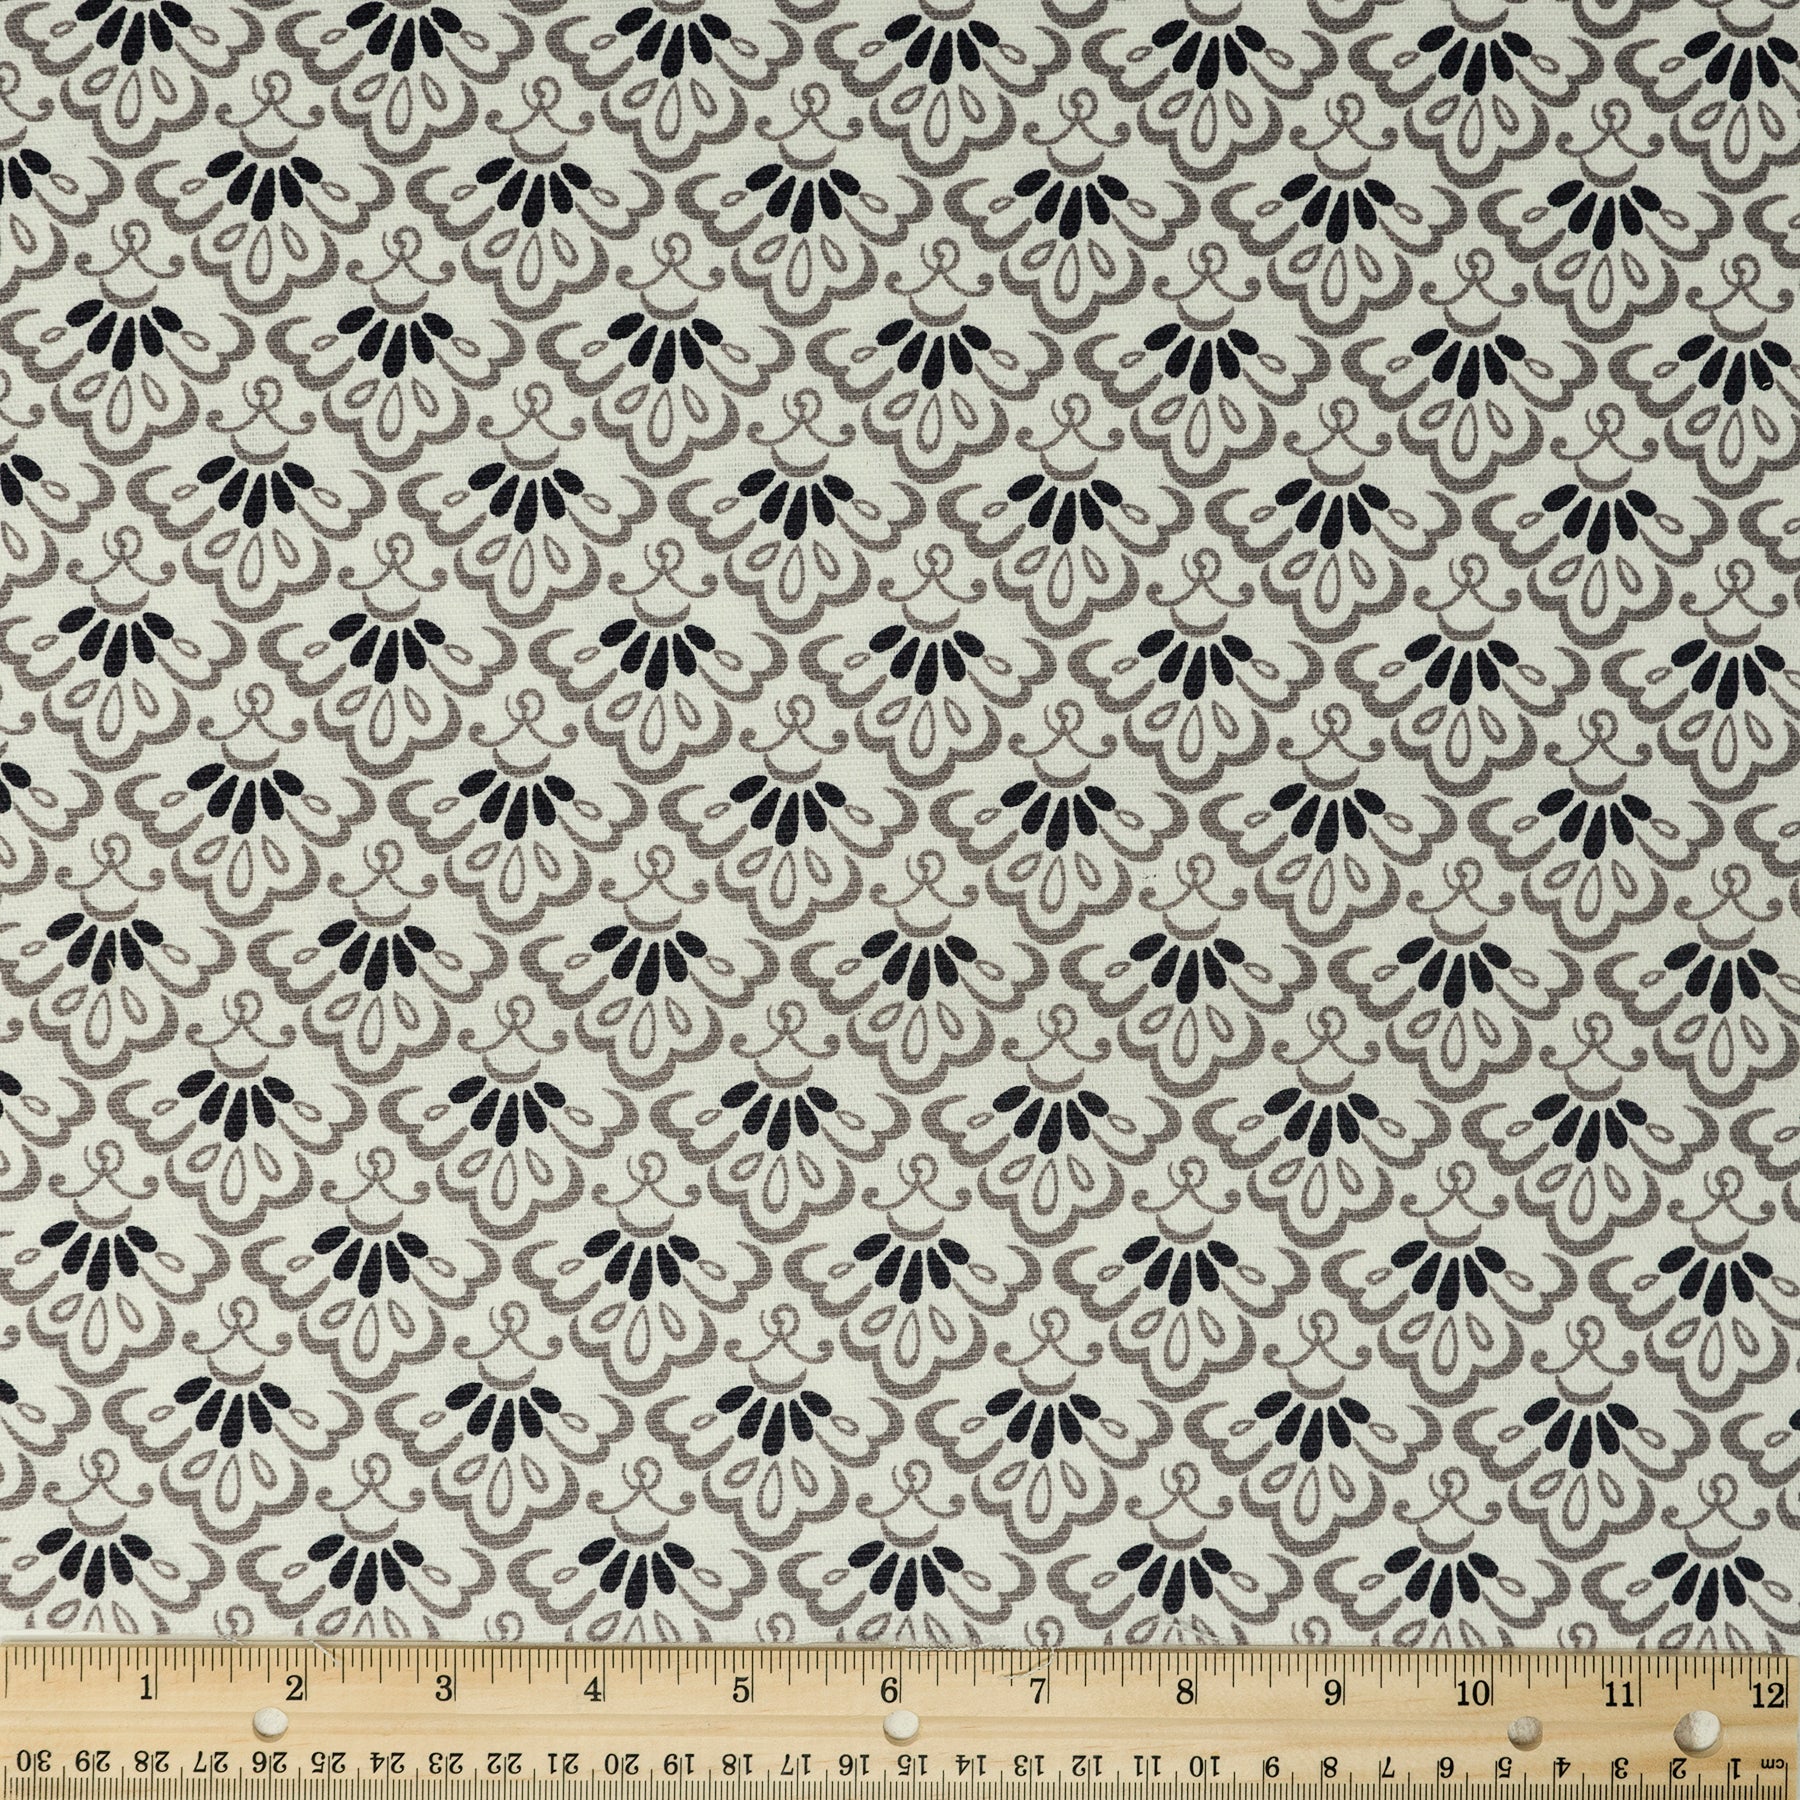 Waverly Inspirations 100% Cotton Duck 45" Width Scallop Print Grey Color Sewing Fabric by the Yard